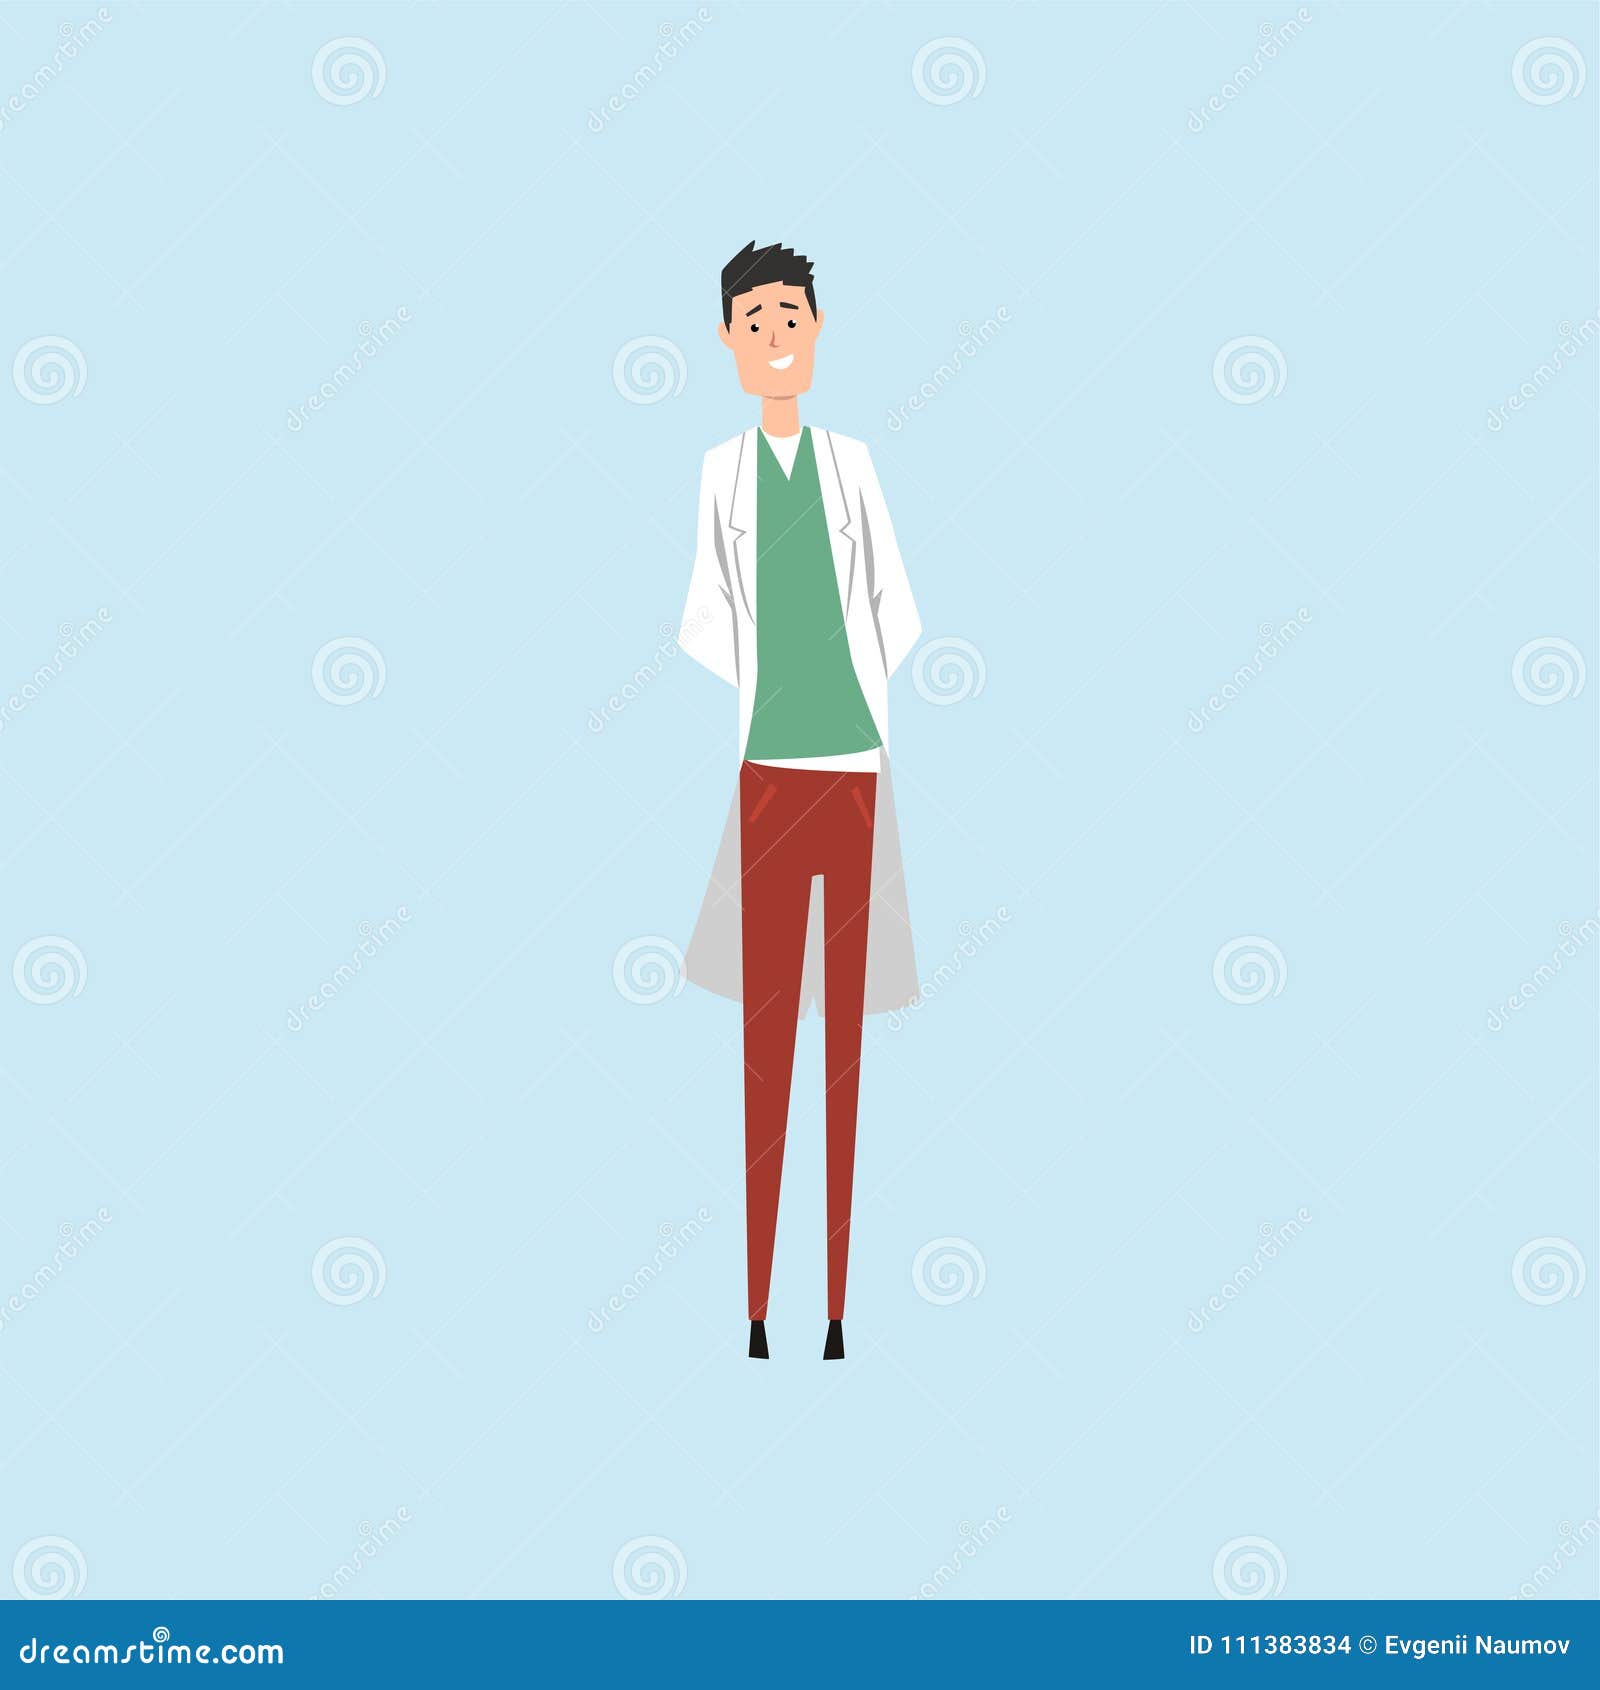 Smiling Male Doctor Character Vector Illustration on a Light Blue ...